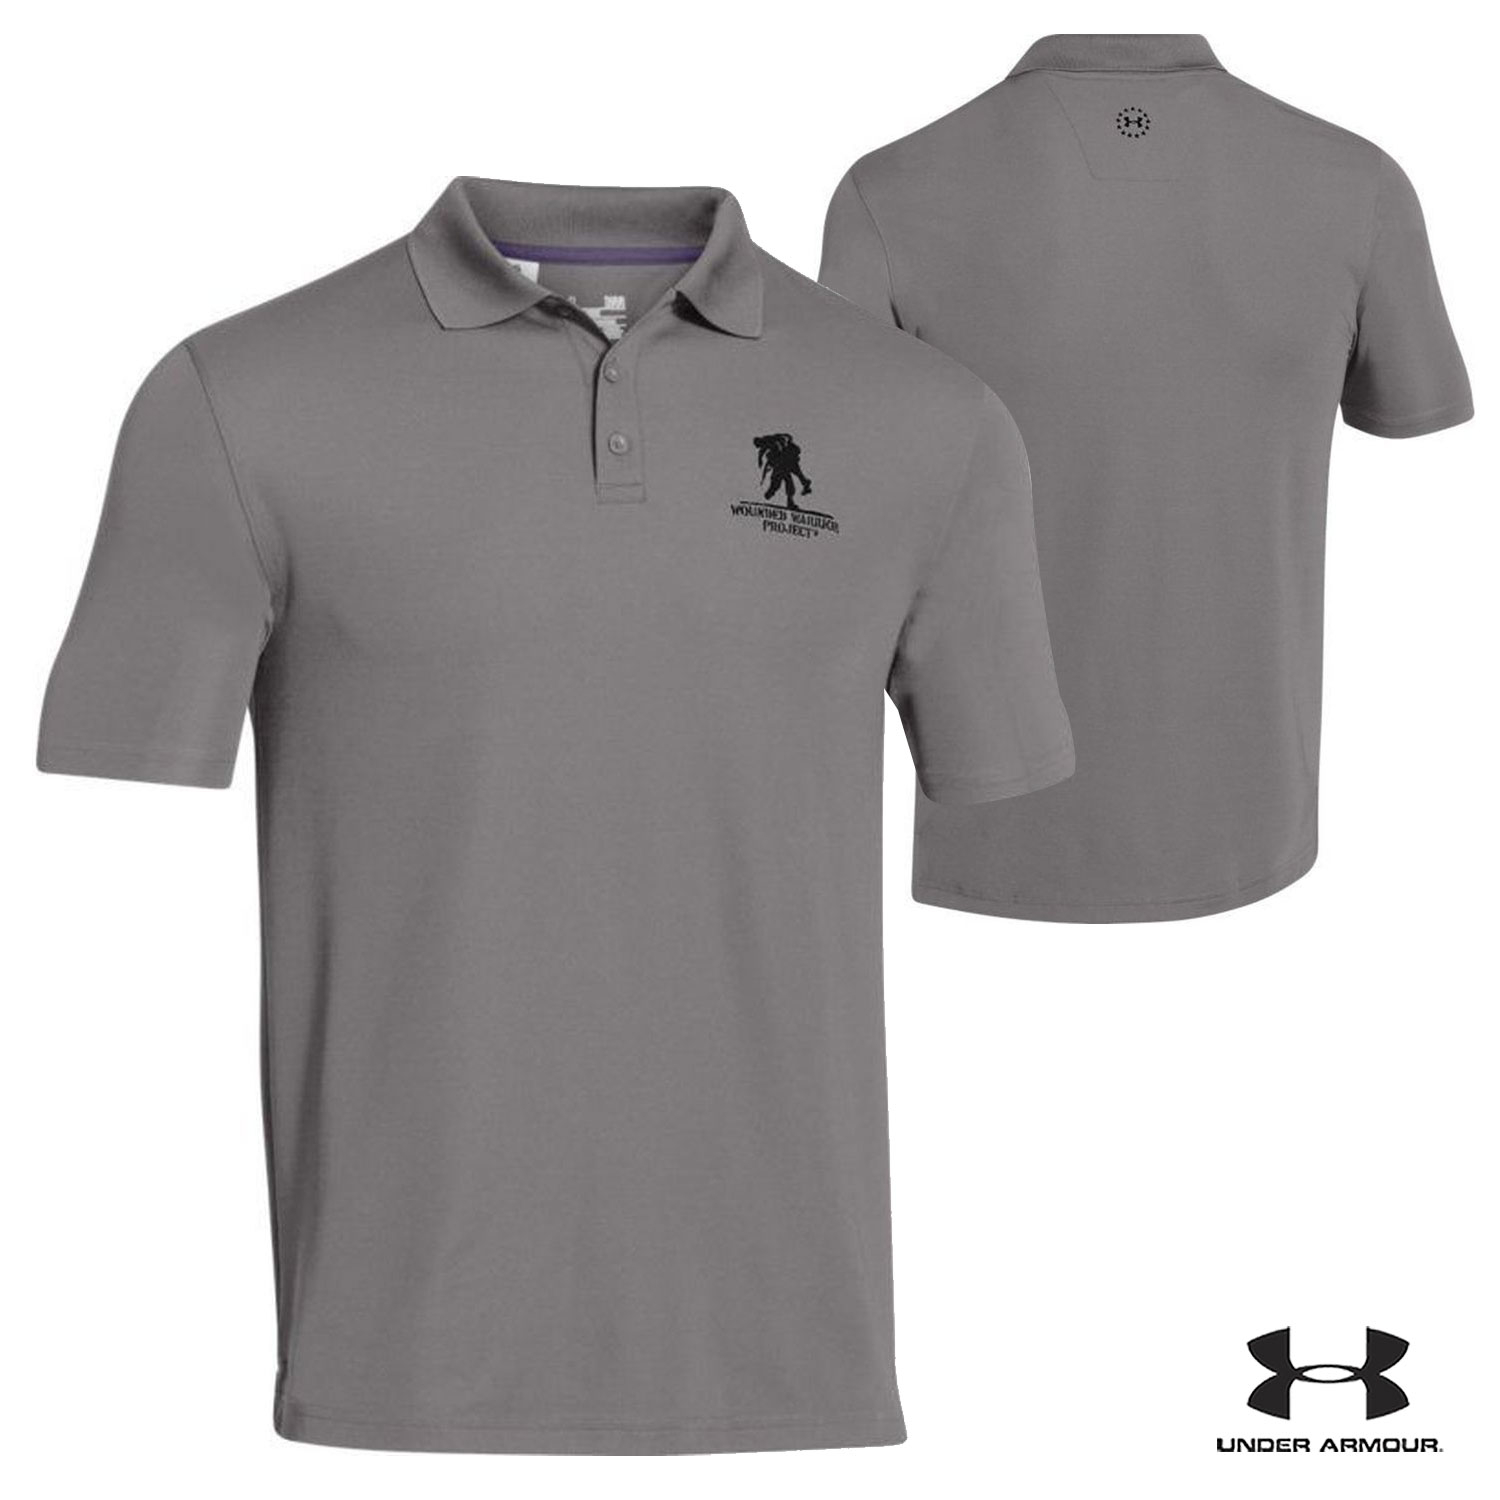 wounded warrior polo